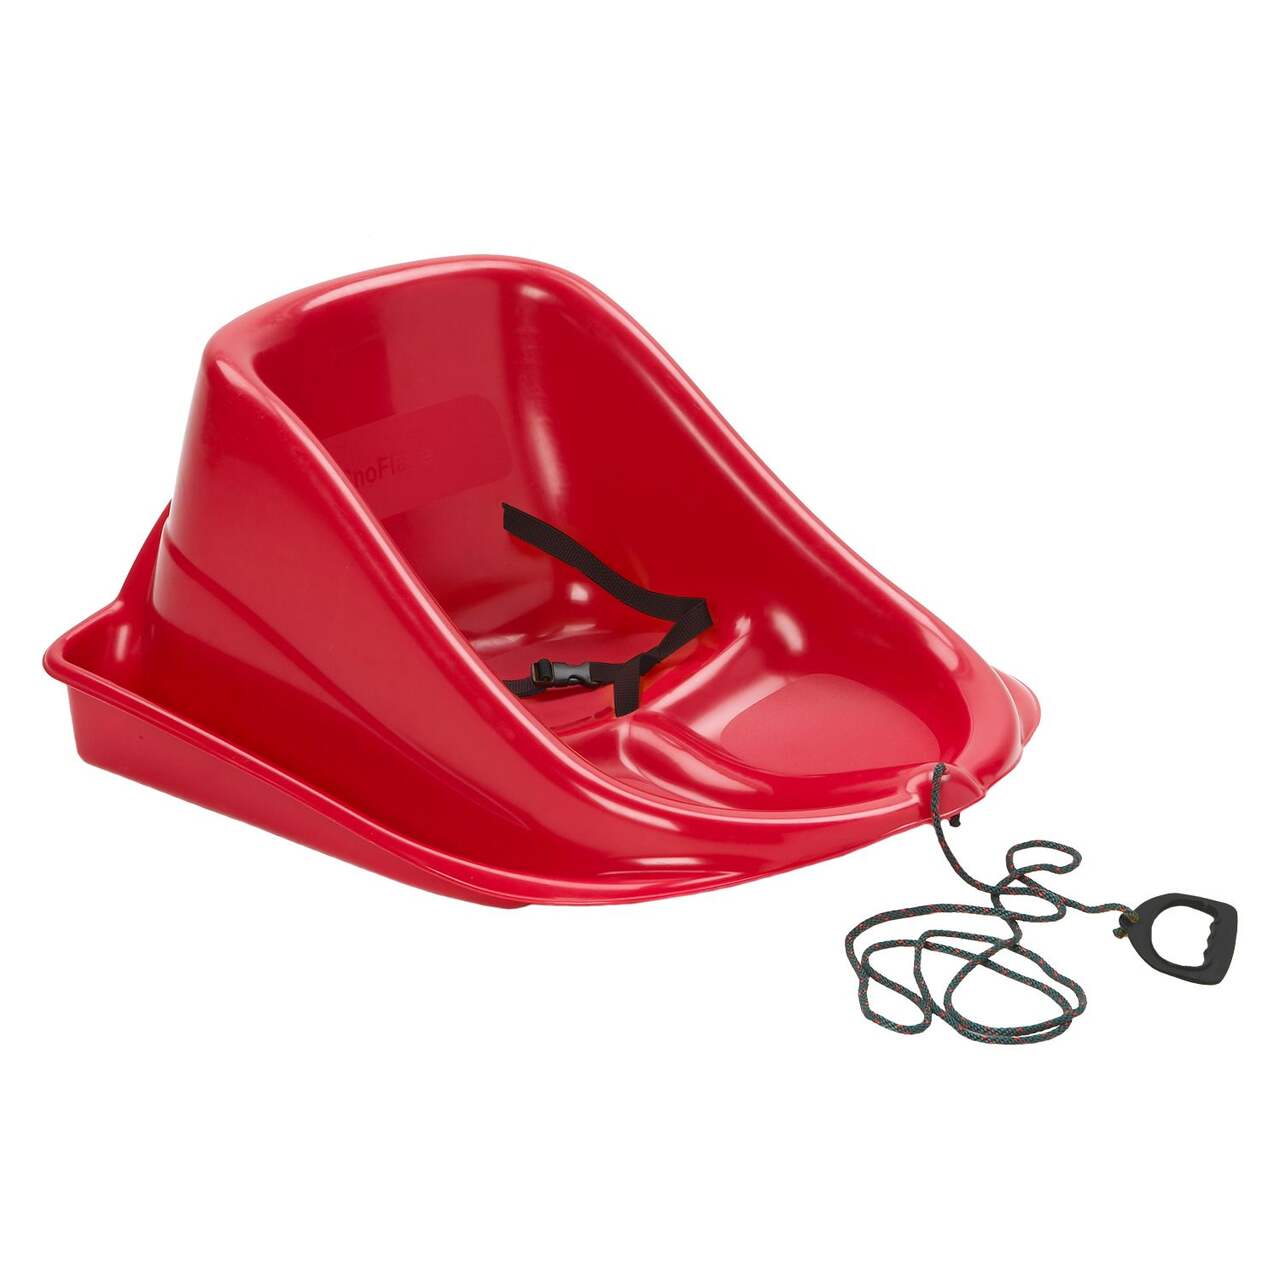 https://media-www.canadiantire.ca/product/playing/seasonal-recreation/winter-recreation/0821098/toddler-snowflake-sled-3a5eef69-d4f8-49af-880b-b3518b5f73ce-jpgrendition.jpg?imdensity=1&imwidth=640&impolicy=mZoom